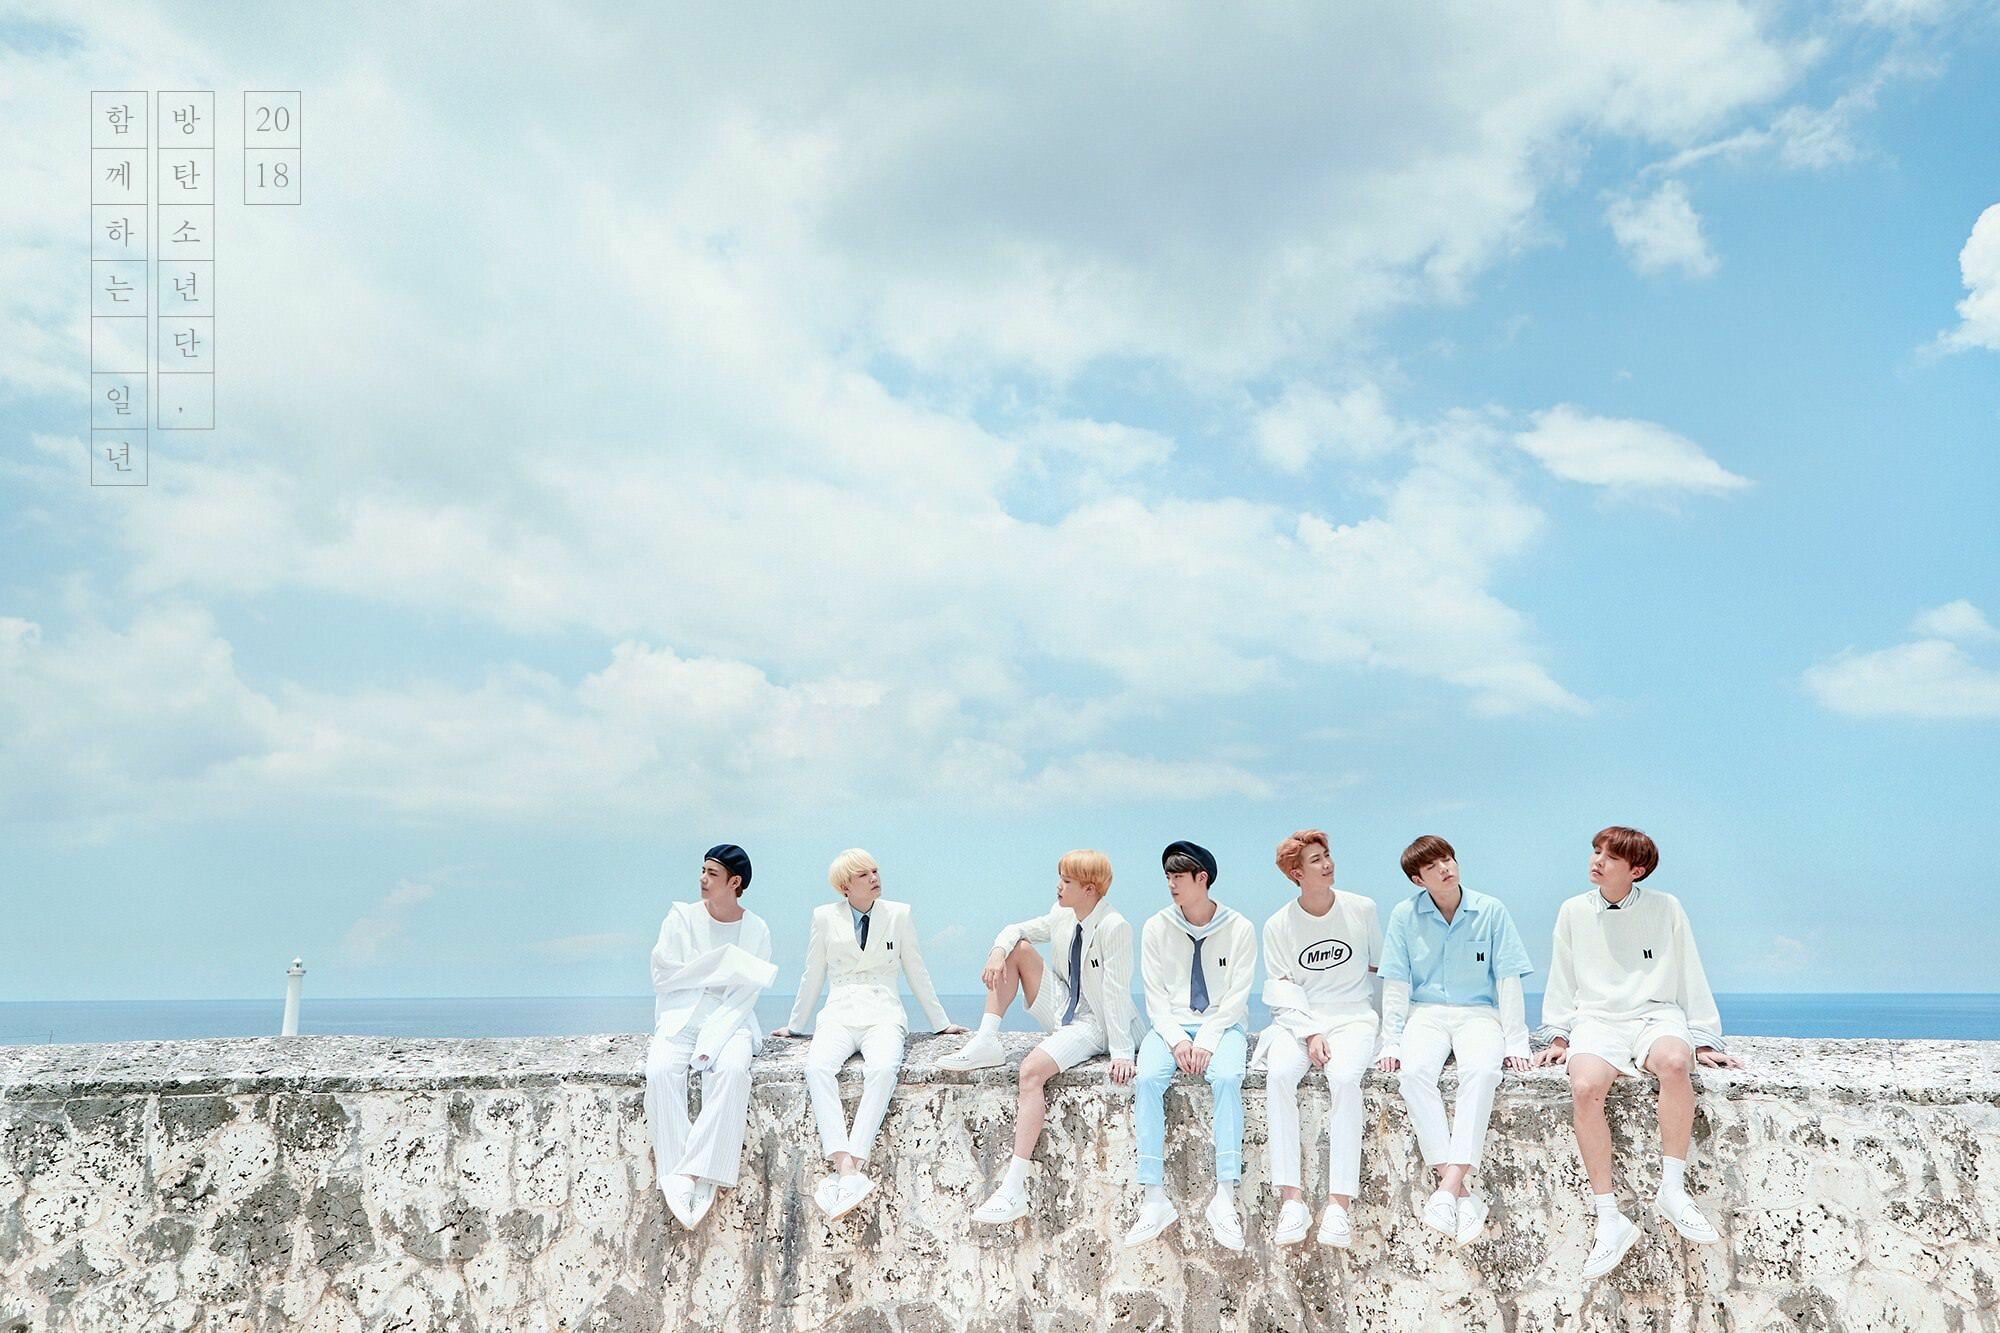 Bts Pc Wallpapers